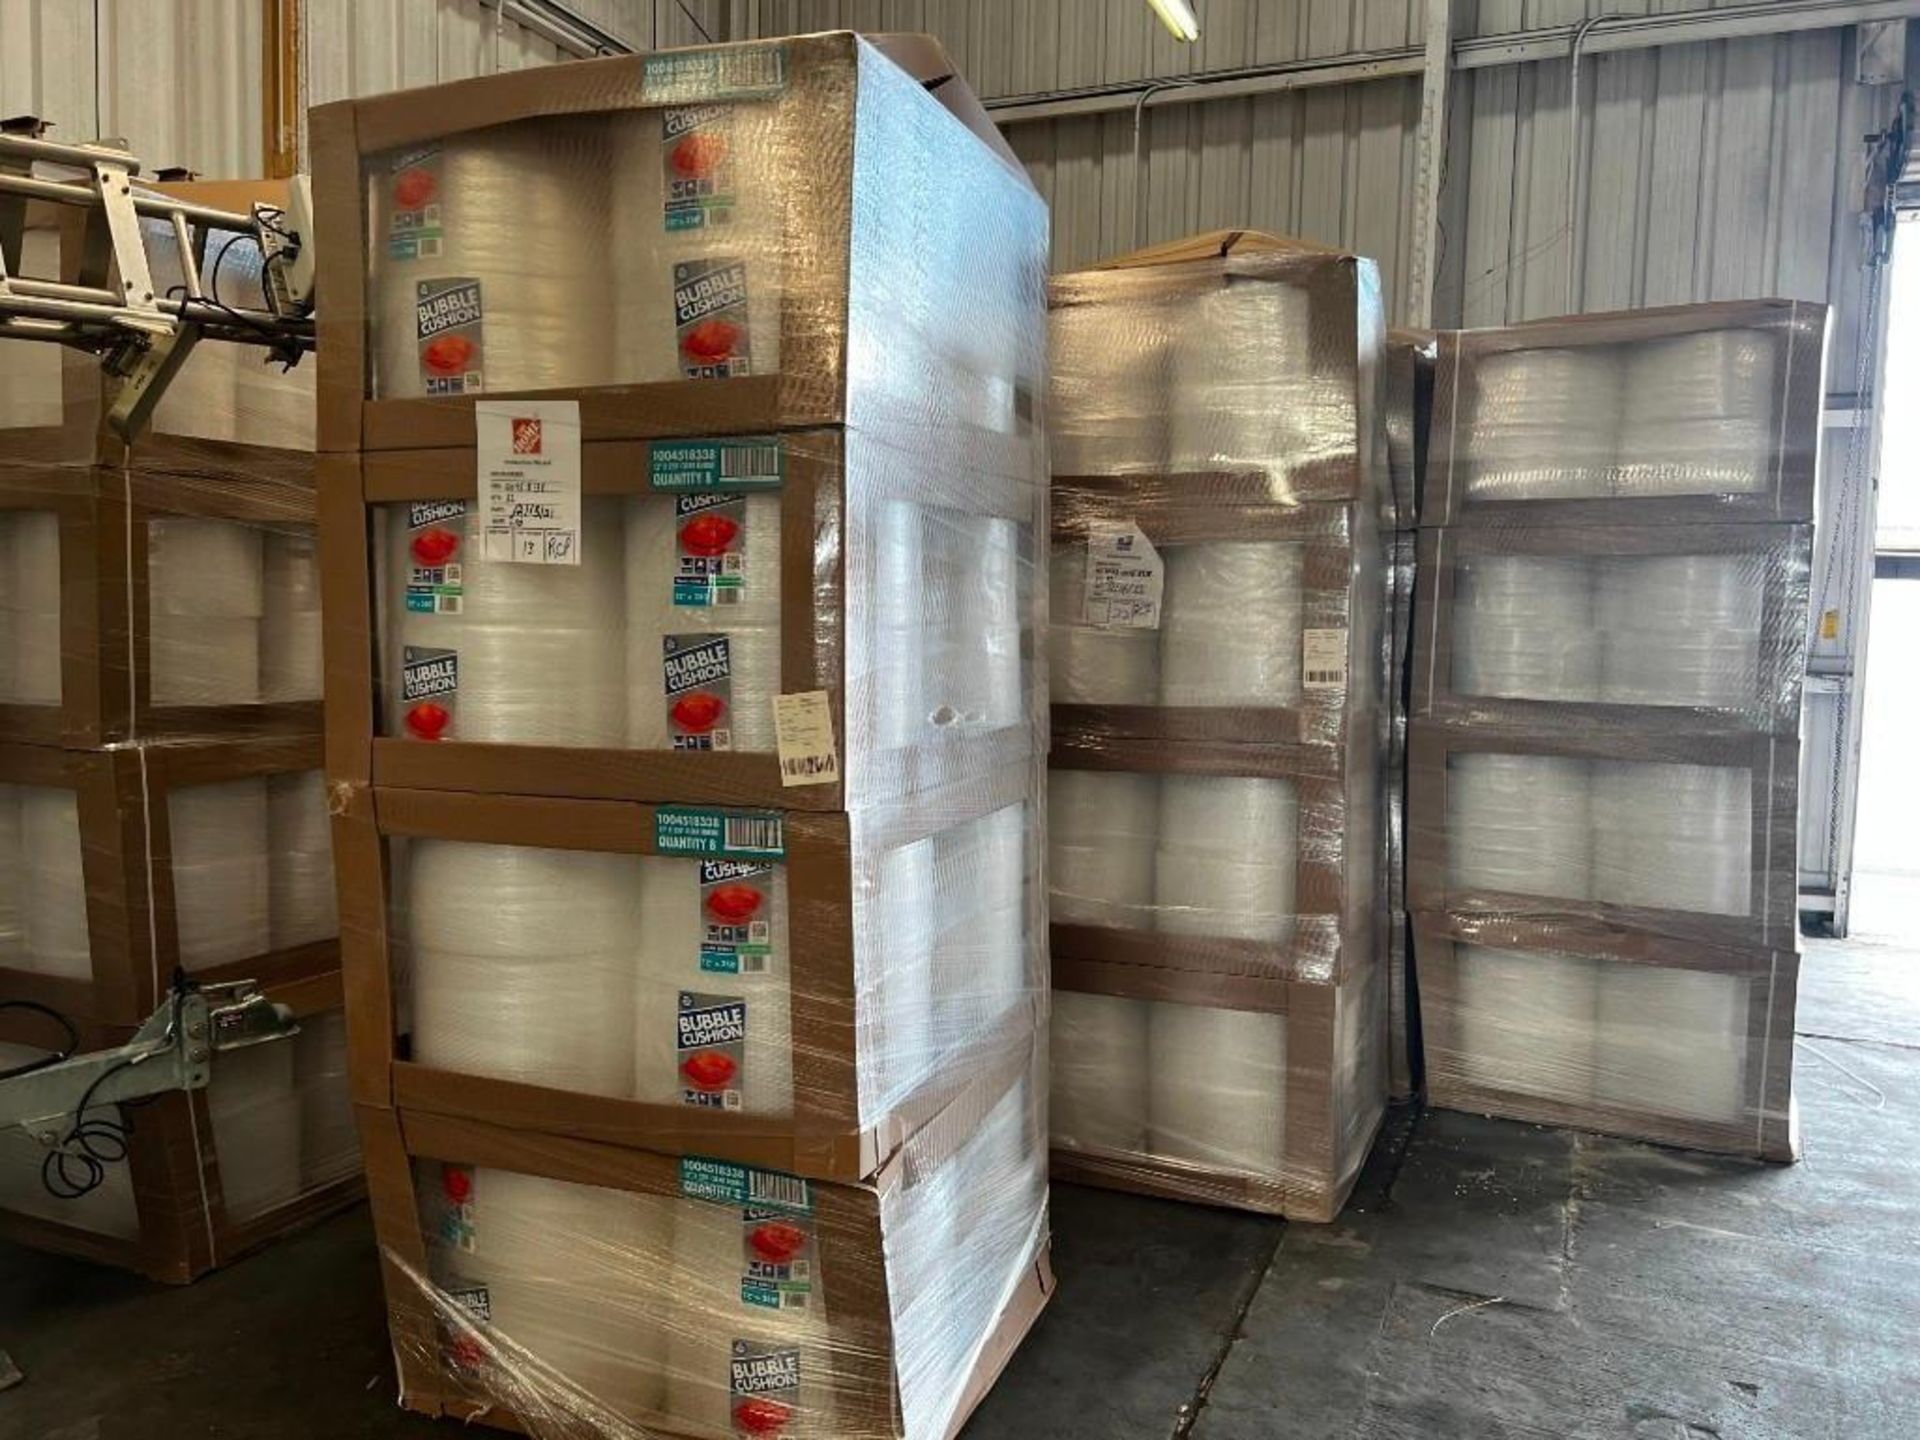 ONE SKID/STACK OF BUBBLE WRAP, 250' X 12" X 3/16", 32 ROLLS PER PALLET